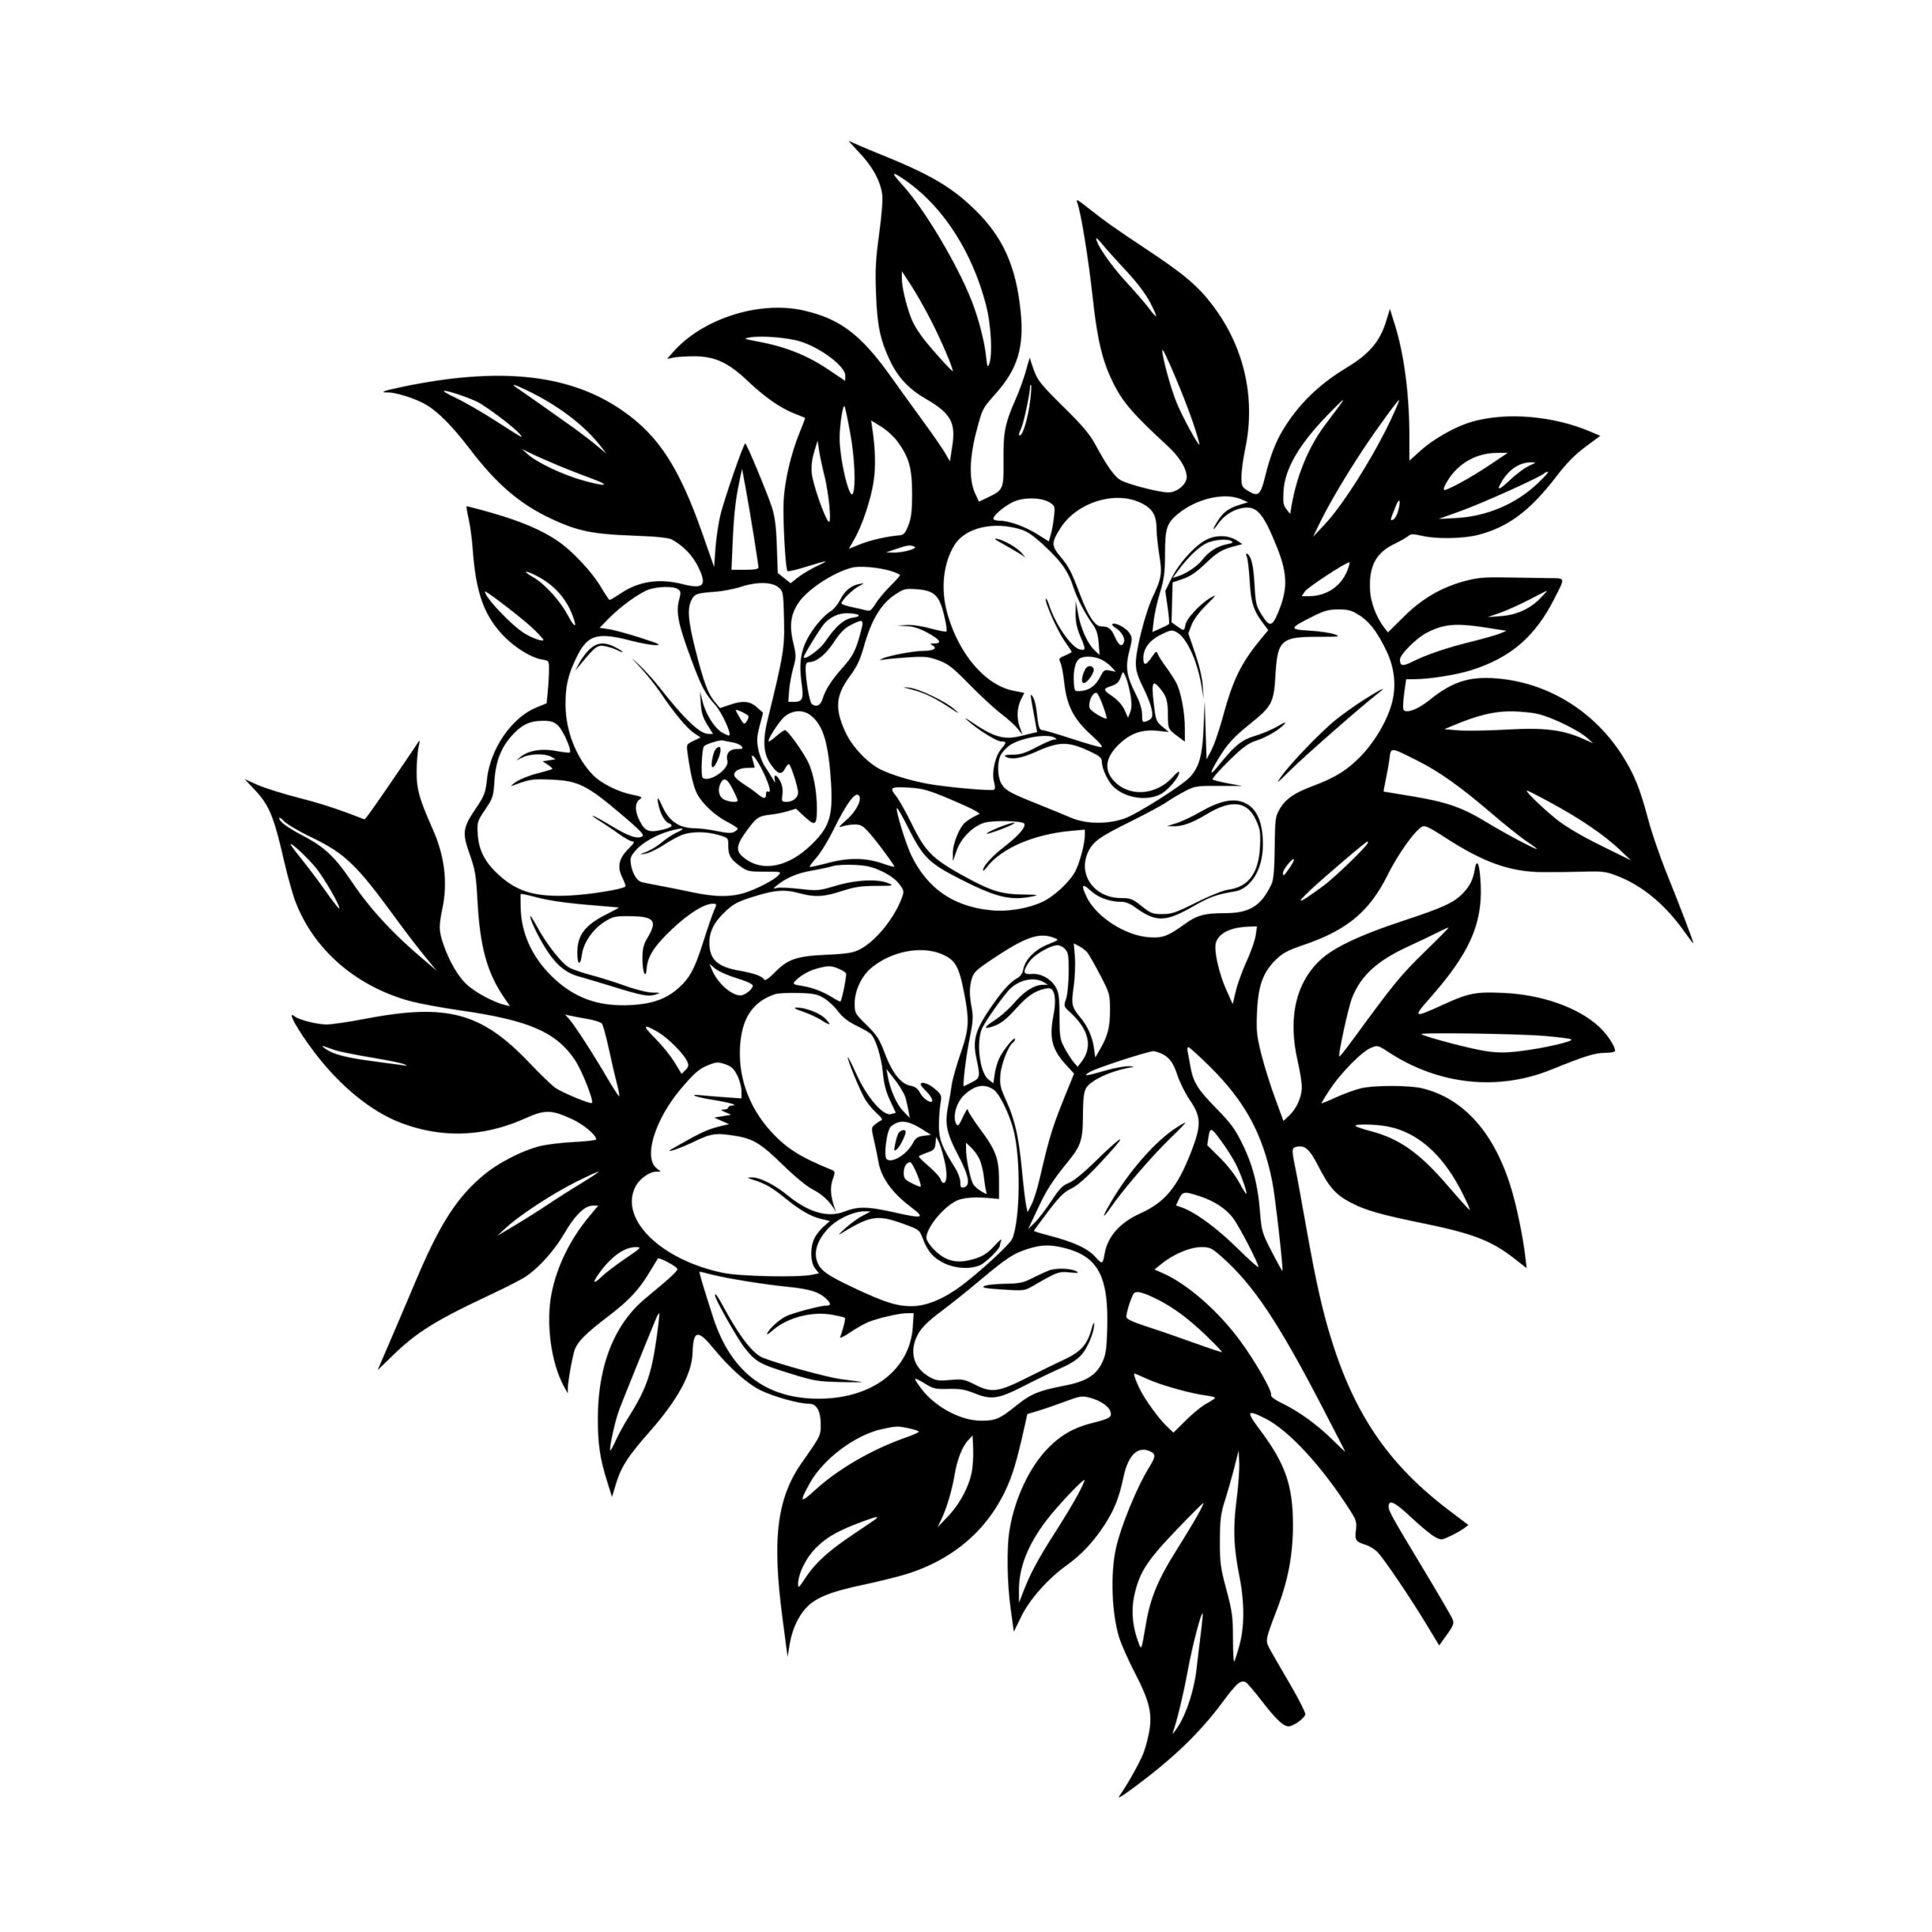 Instant Download SVG Flower Image for Cricut, Silhouette, & Laser Machines